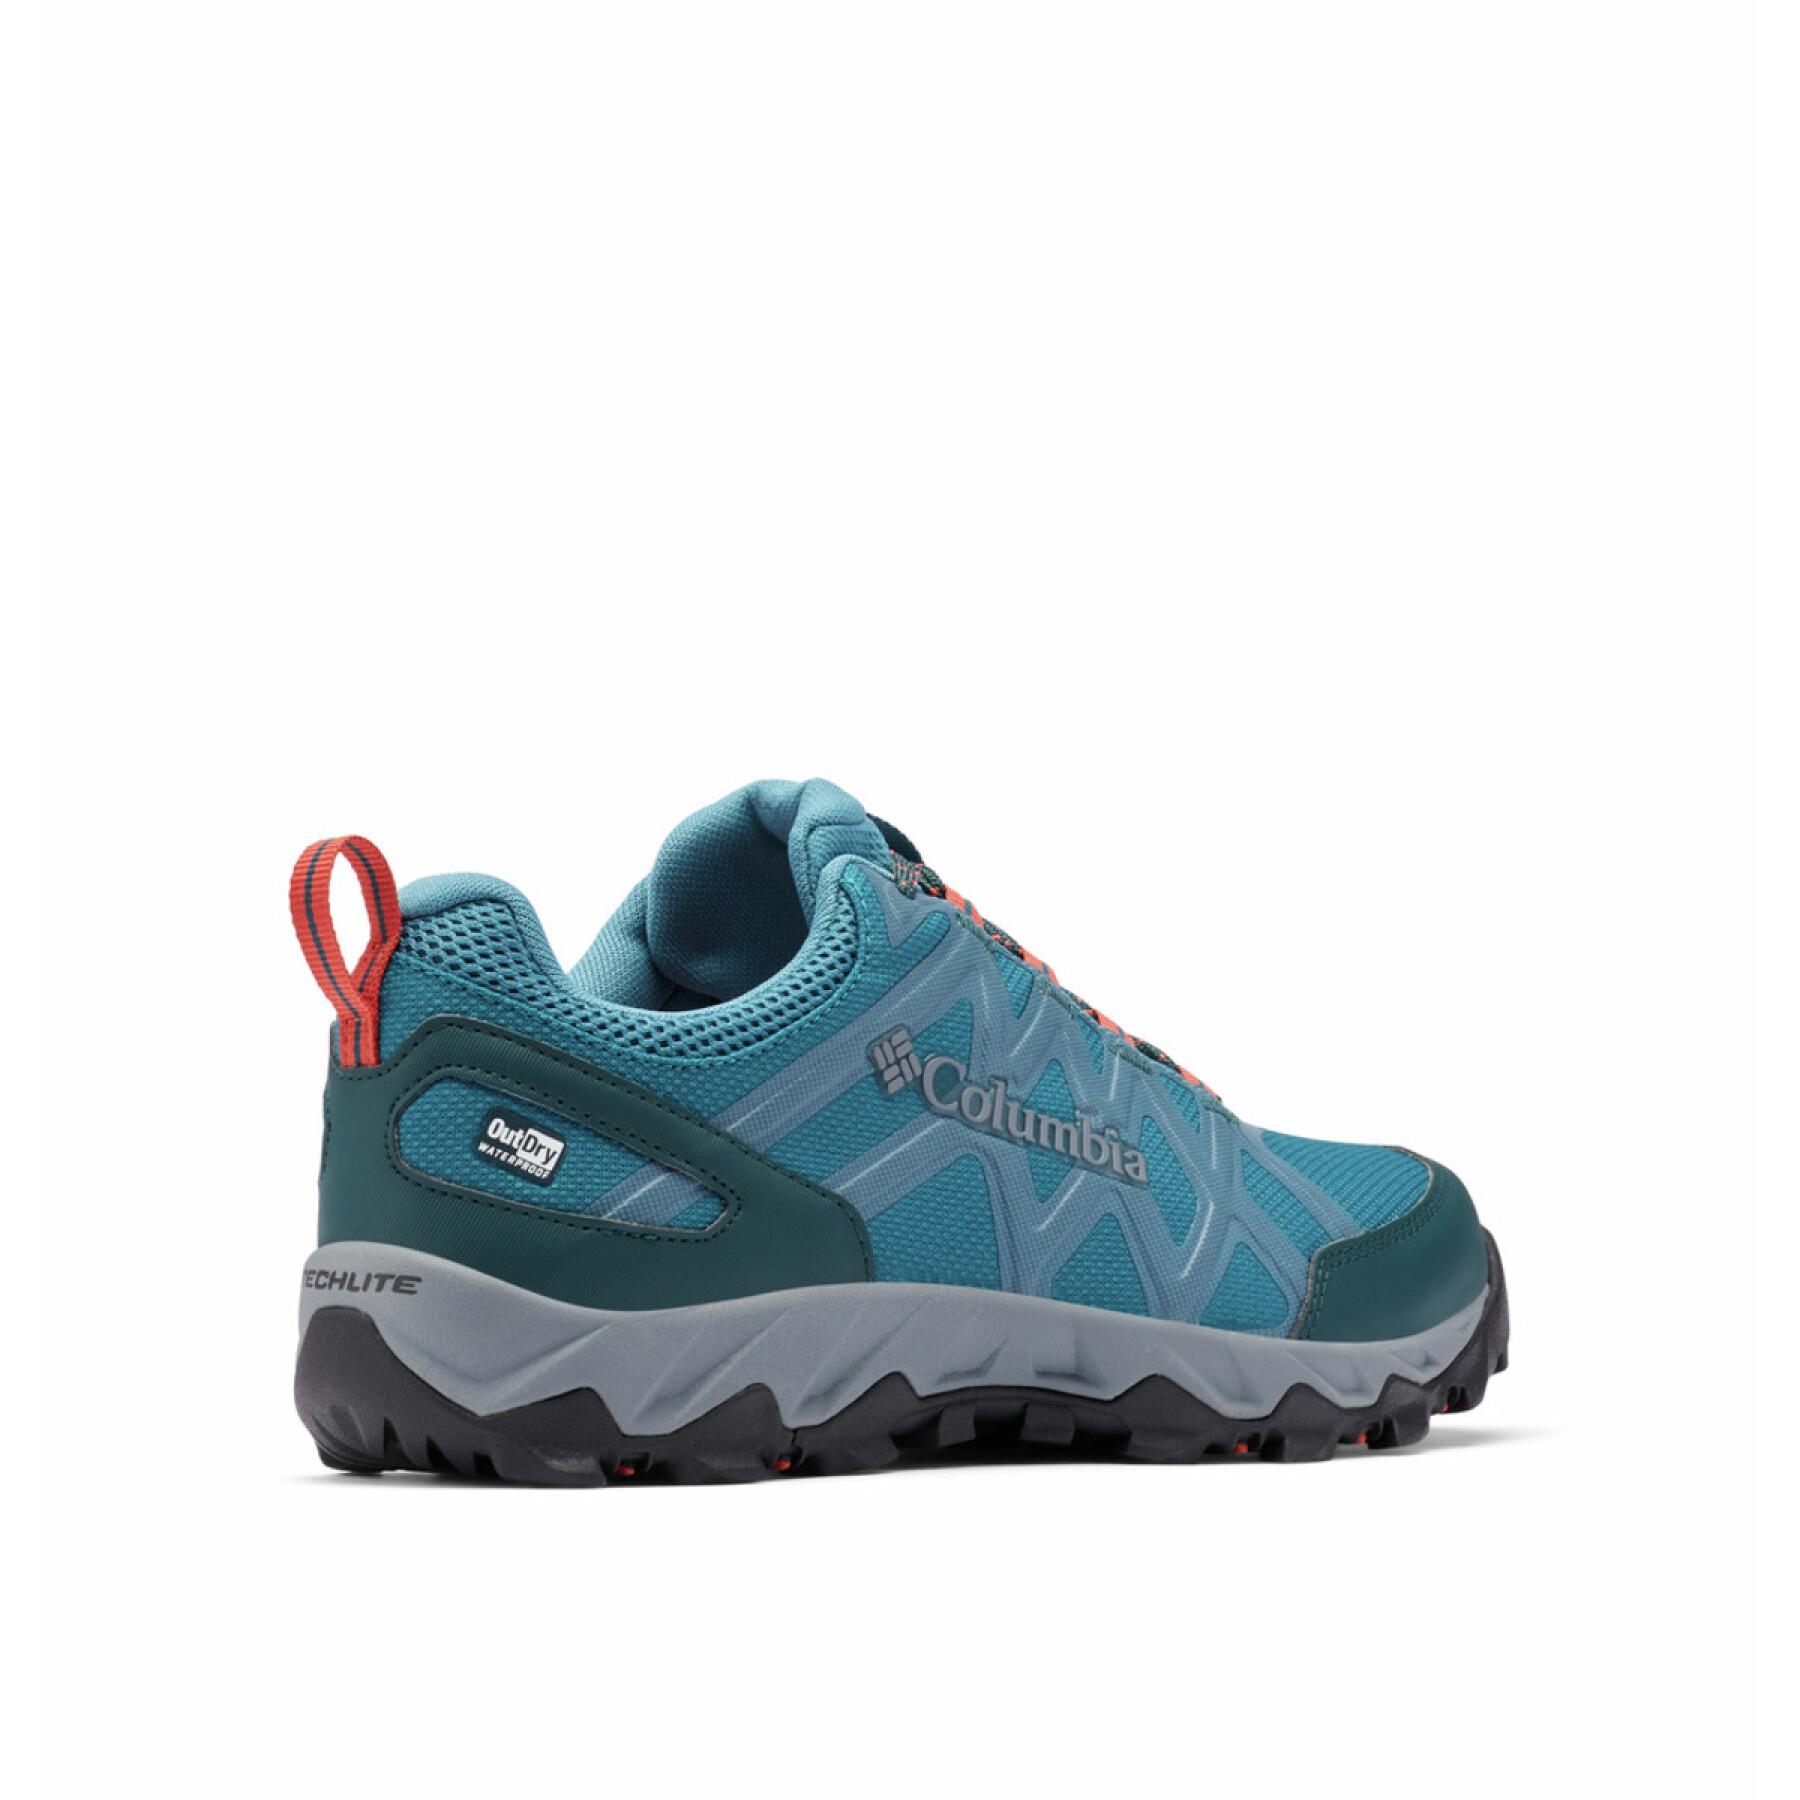 Chaussures femme Columbia PEAKFREAK X2 OUTDRY